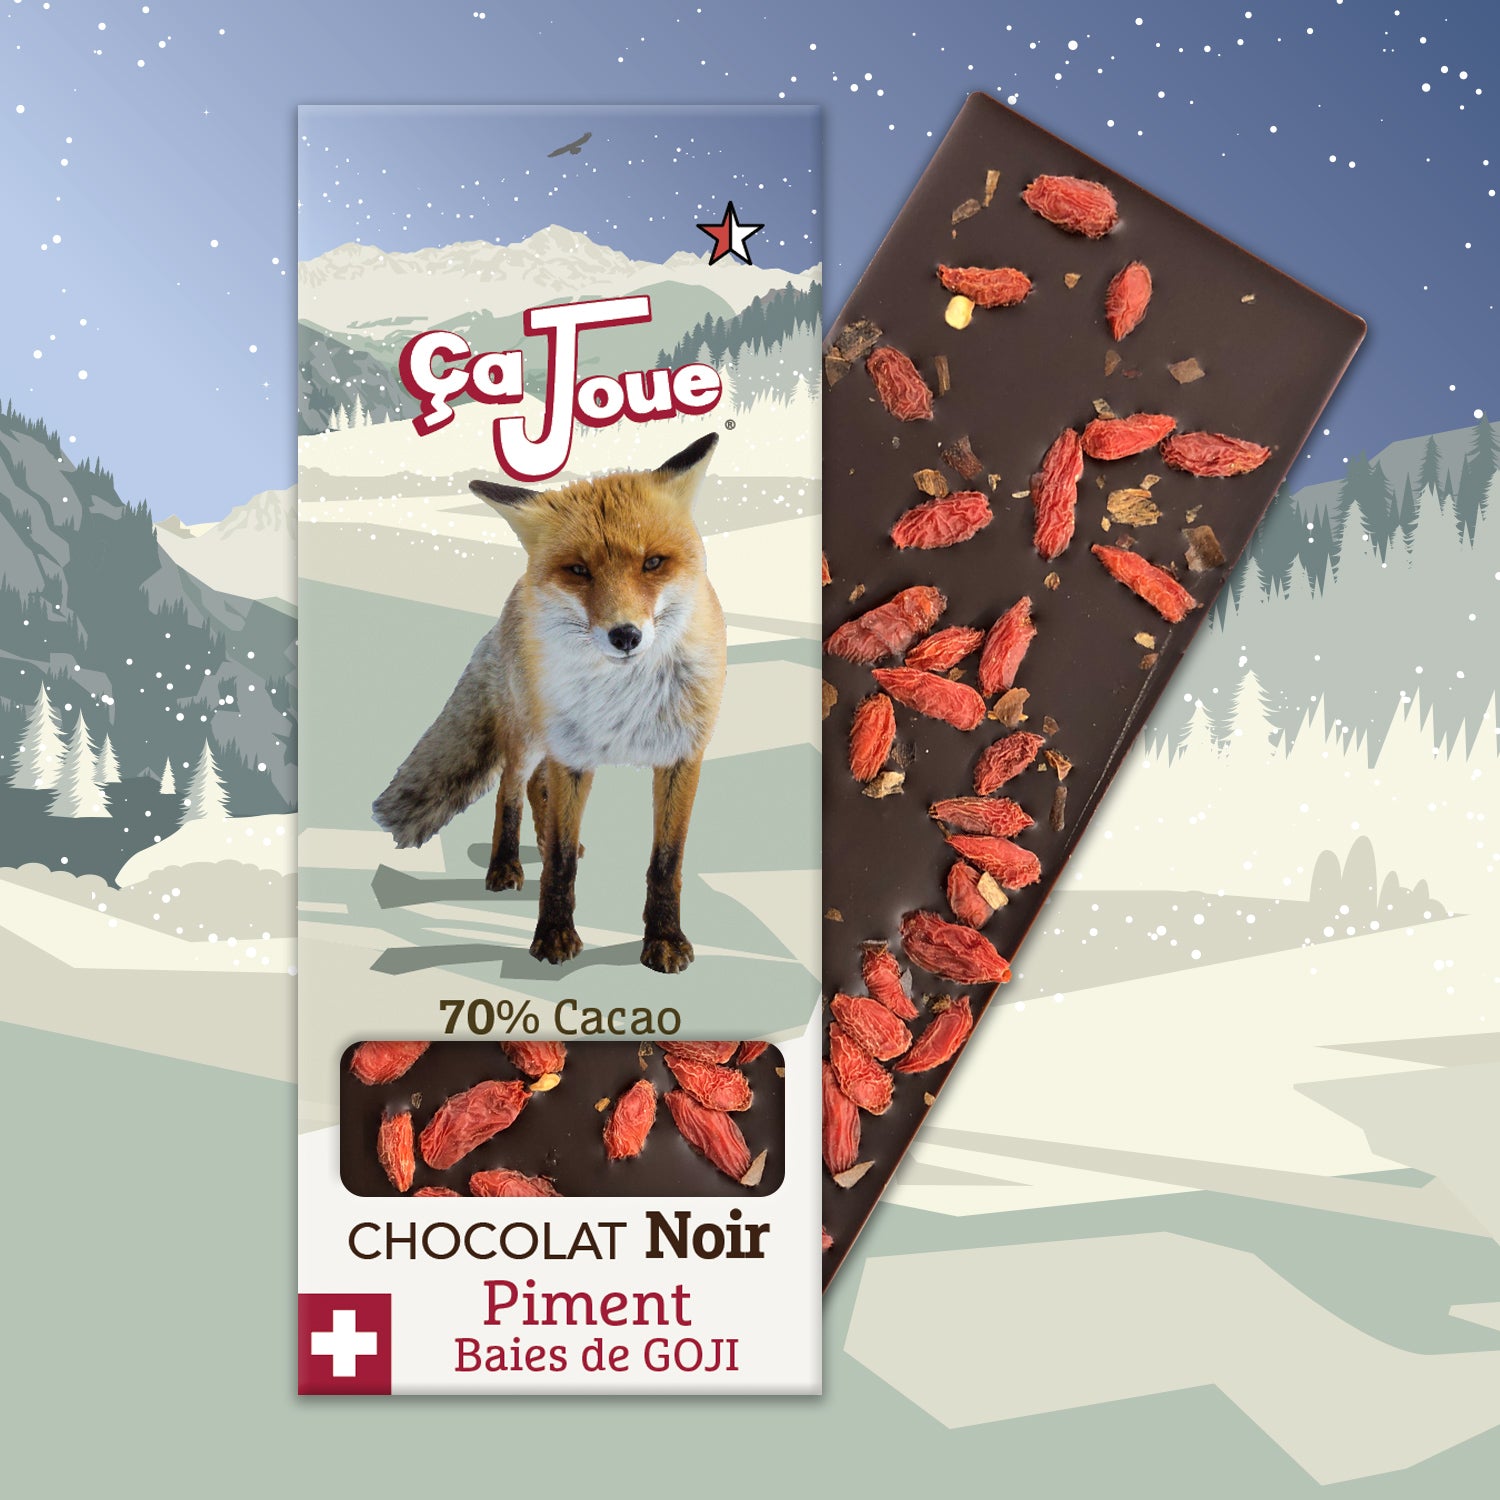 Ça Joue for the Foxes (Ref-BN6) Chocolate from Val de Bagnes